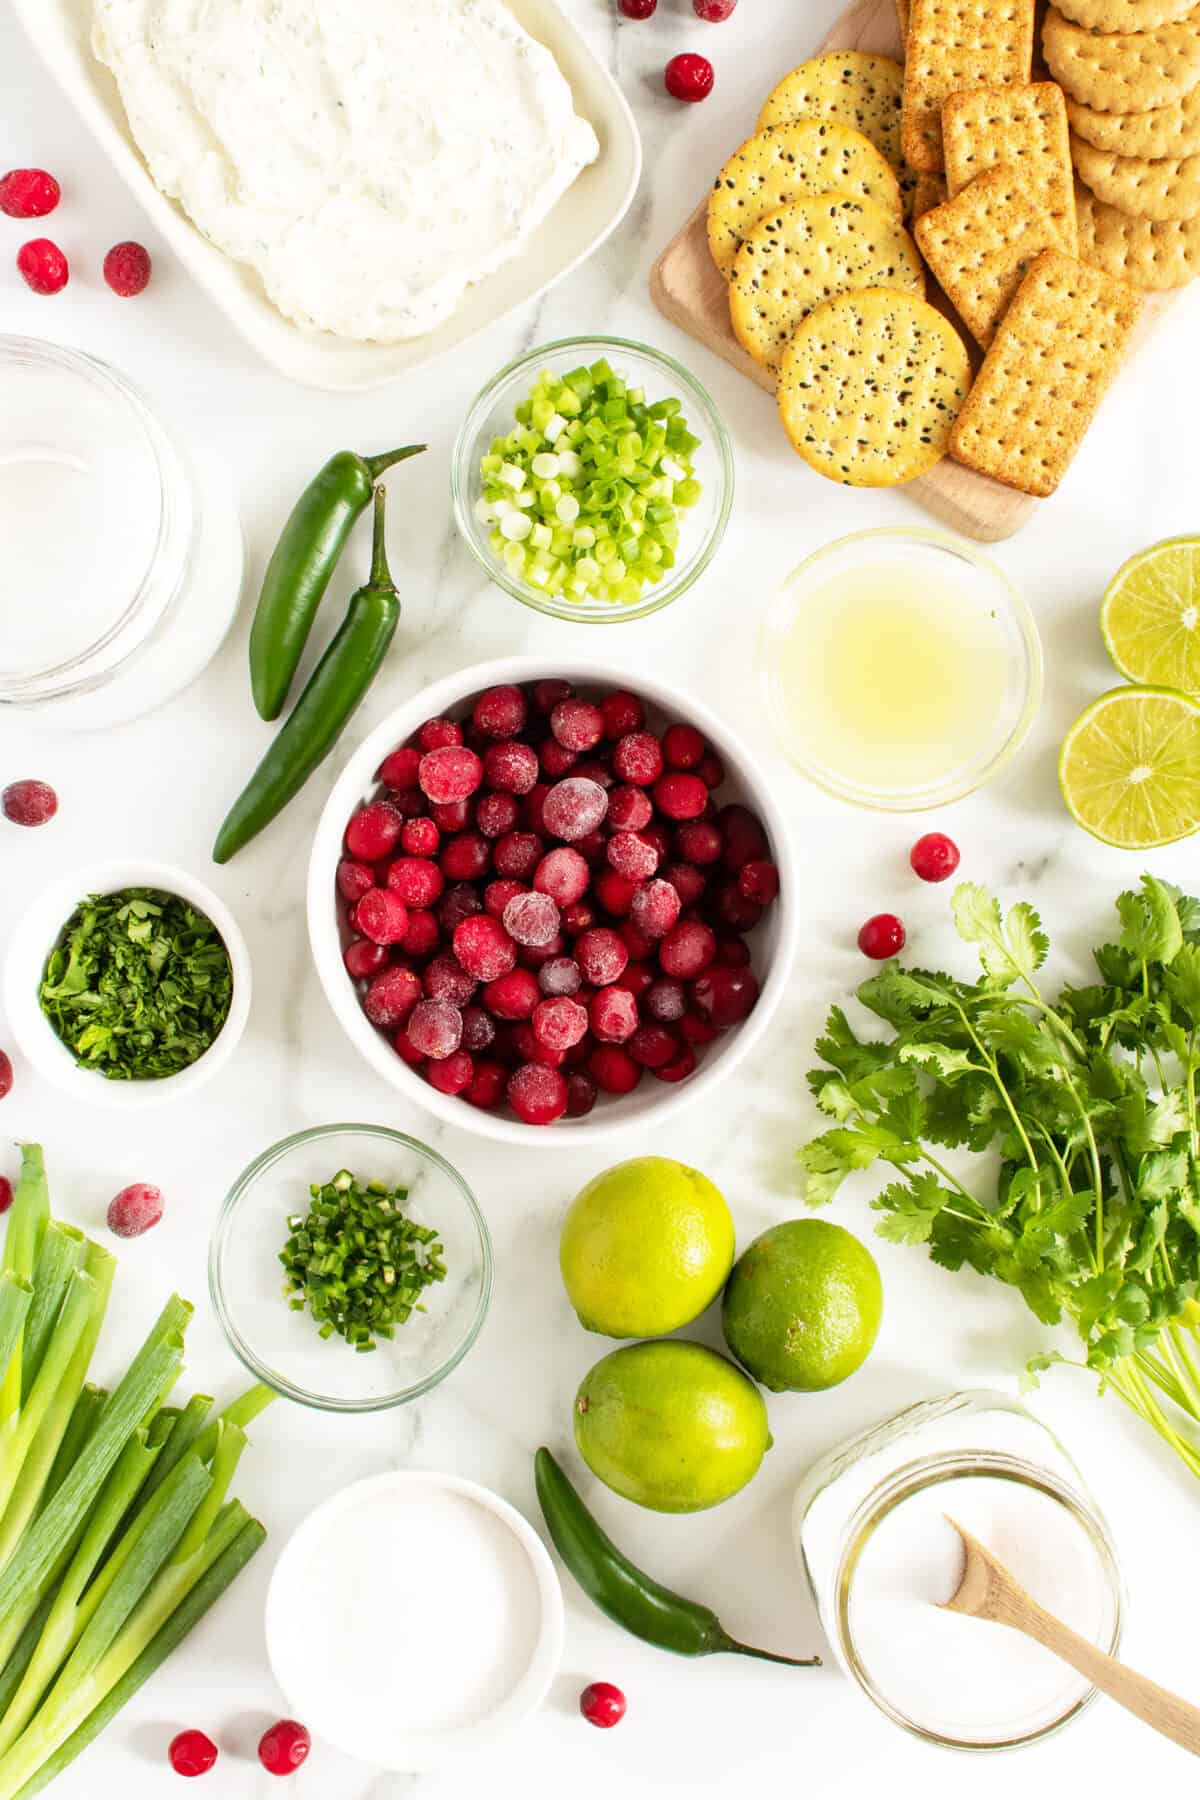 cranberry jalapeno dip ingredients in small clear bowls